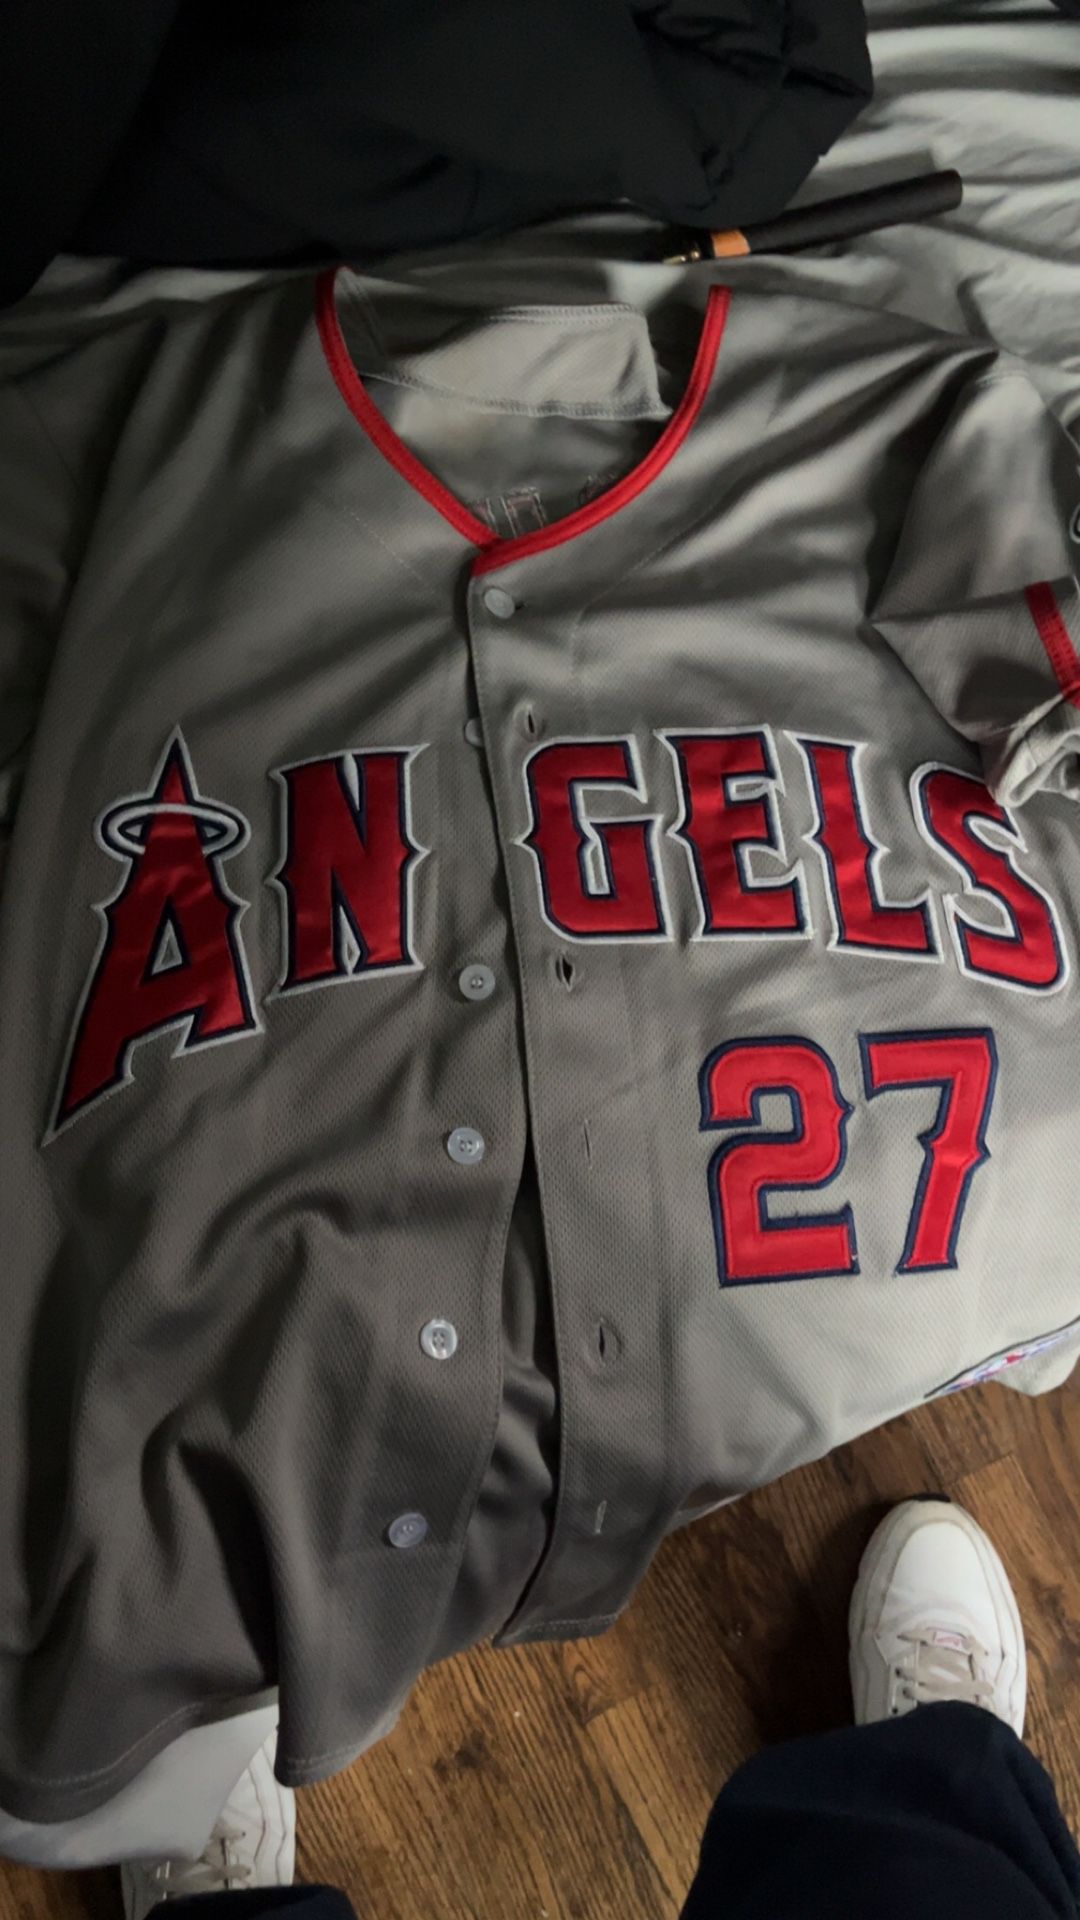 Trout Jersey